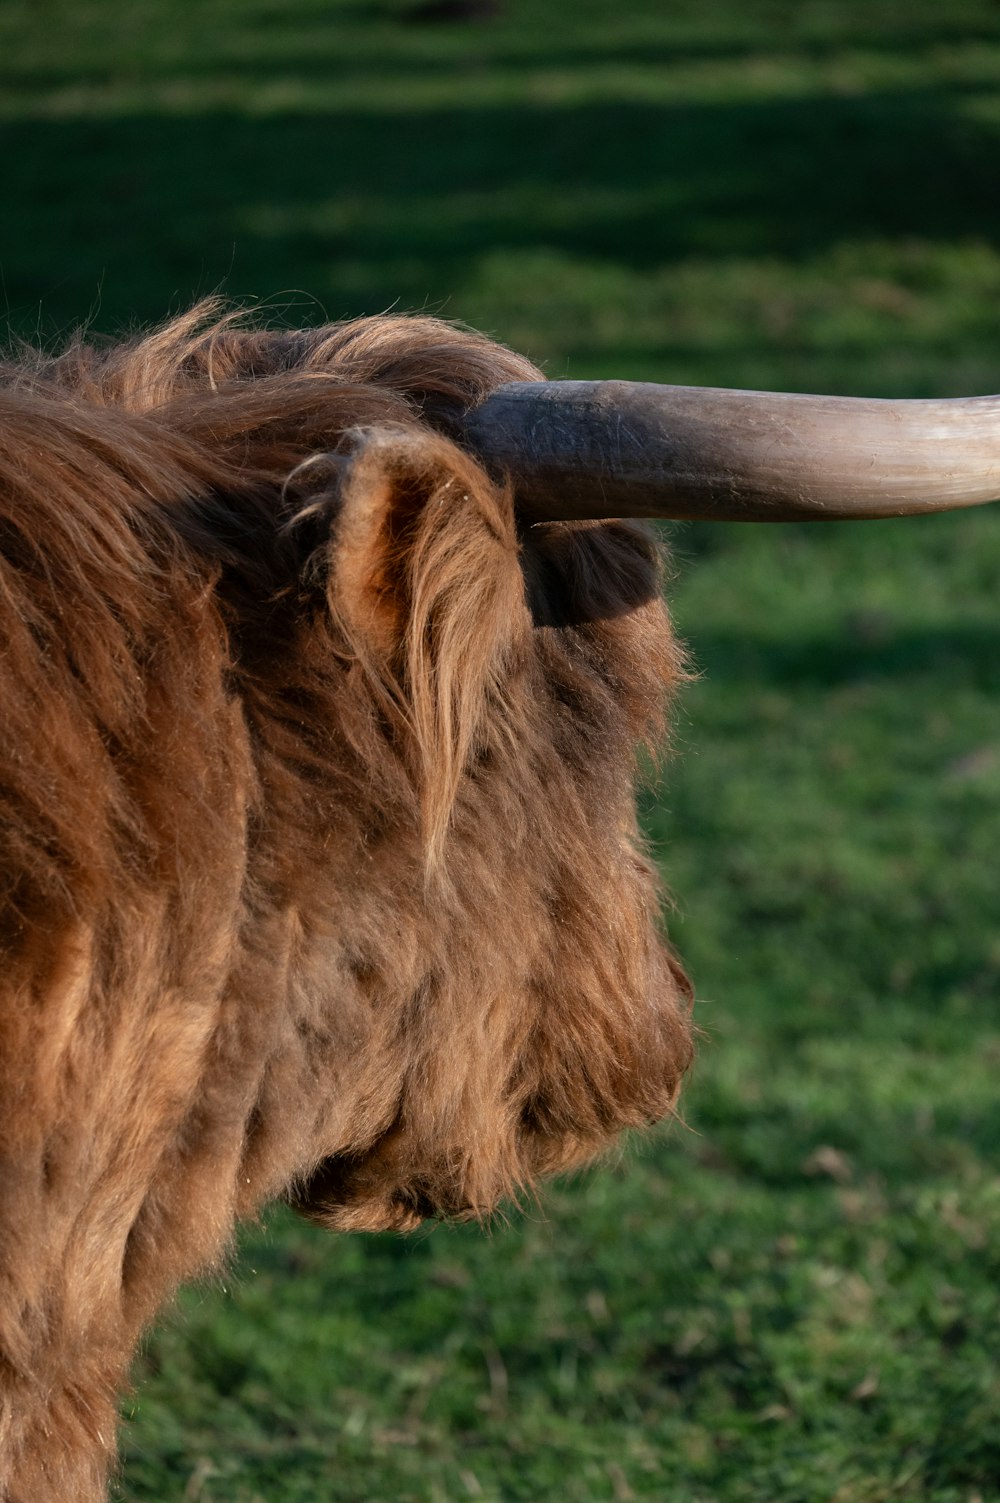 a close up of an animal with long horns